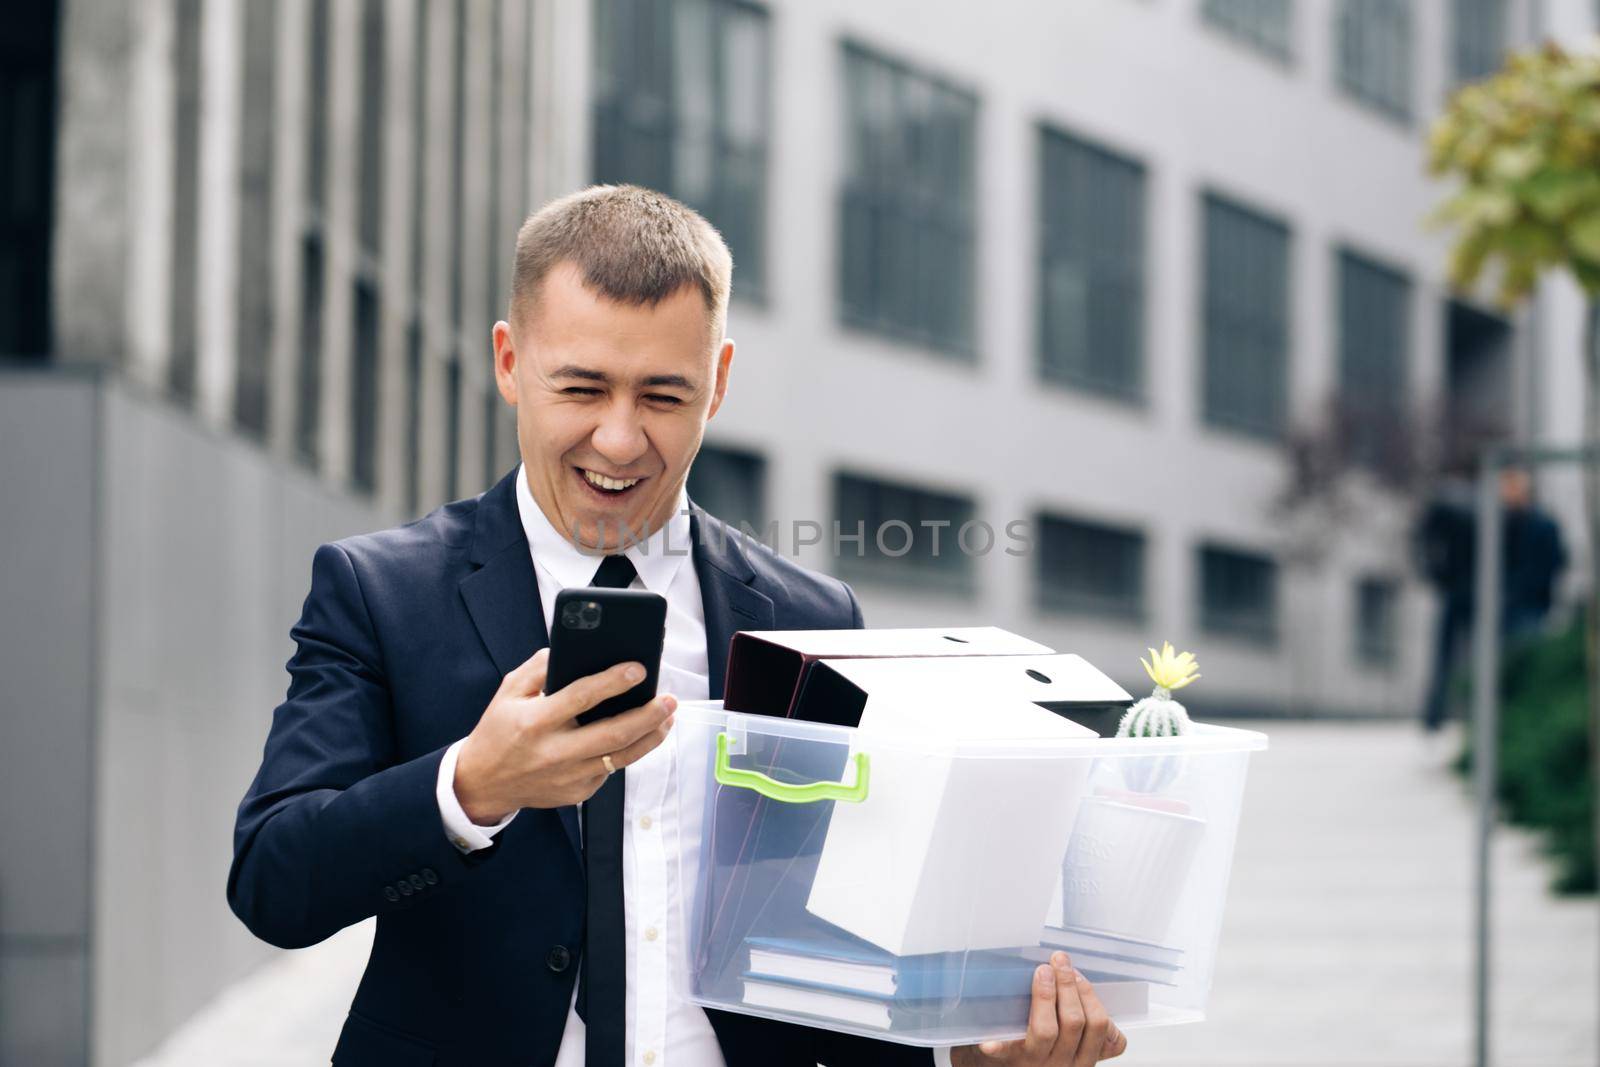 Businessman with box of personal stuff uses phone texting scrolling tapping. Happy businessman stand smiling use phone near business center. Portrait suit career male office handsome technology by uflypro